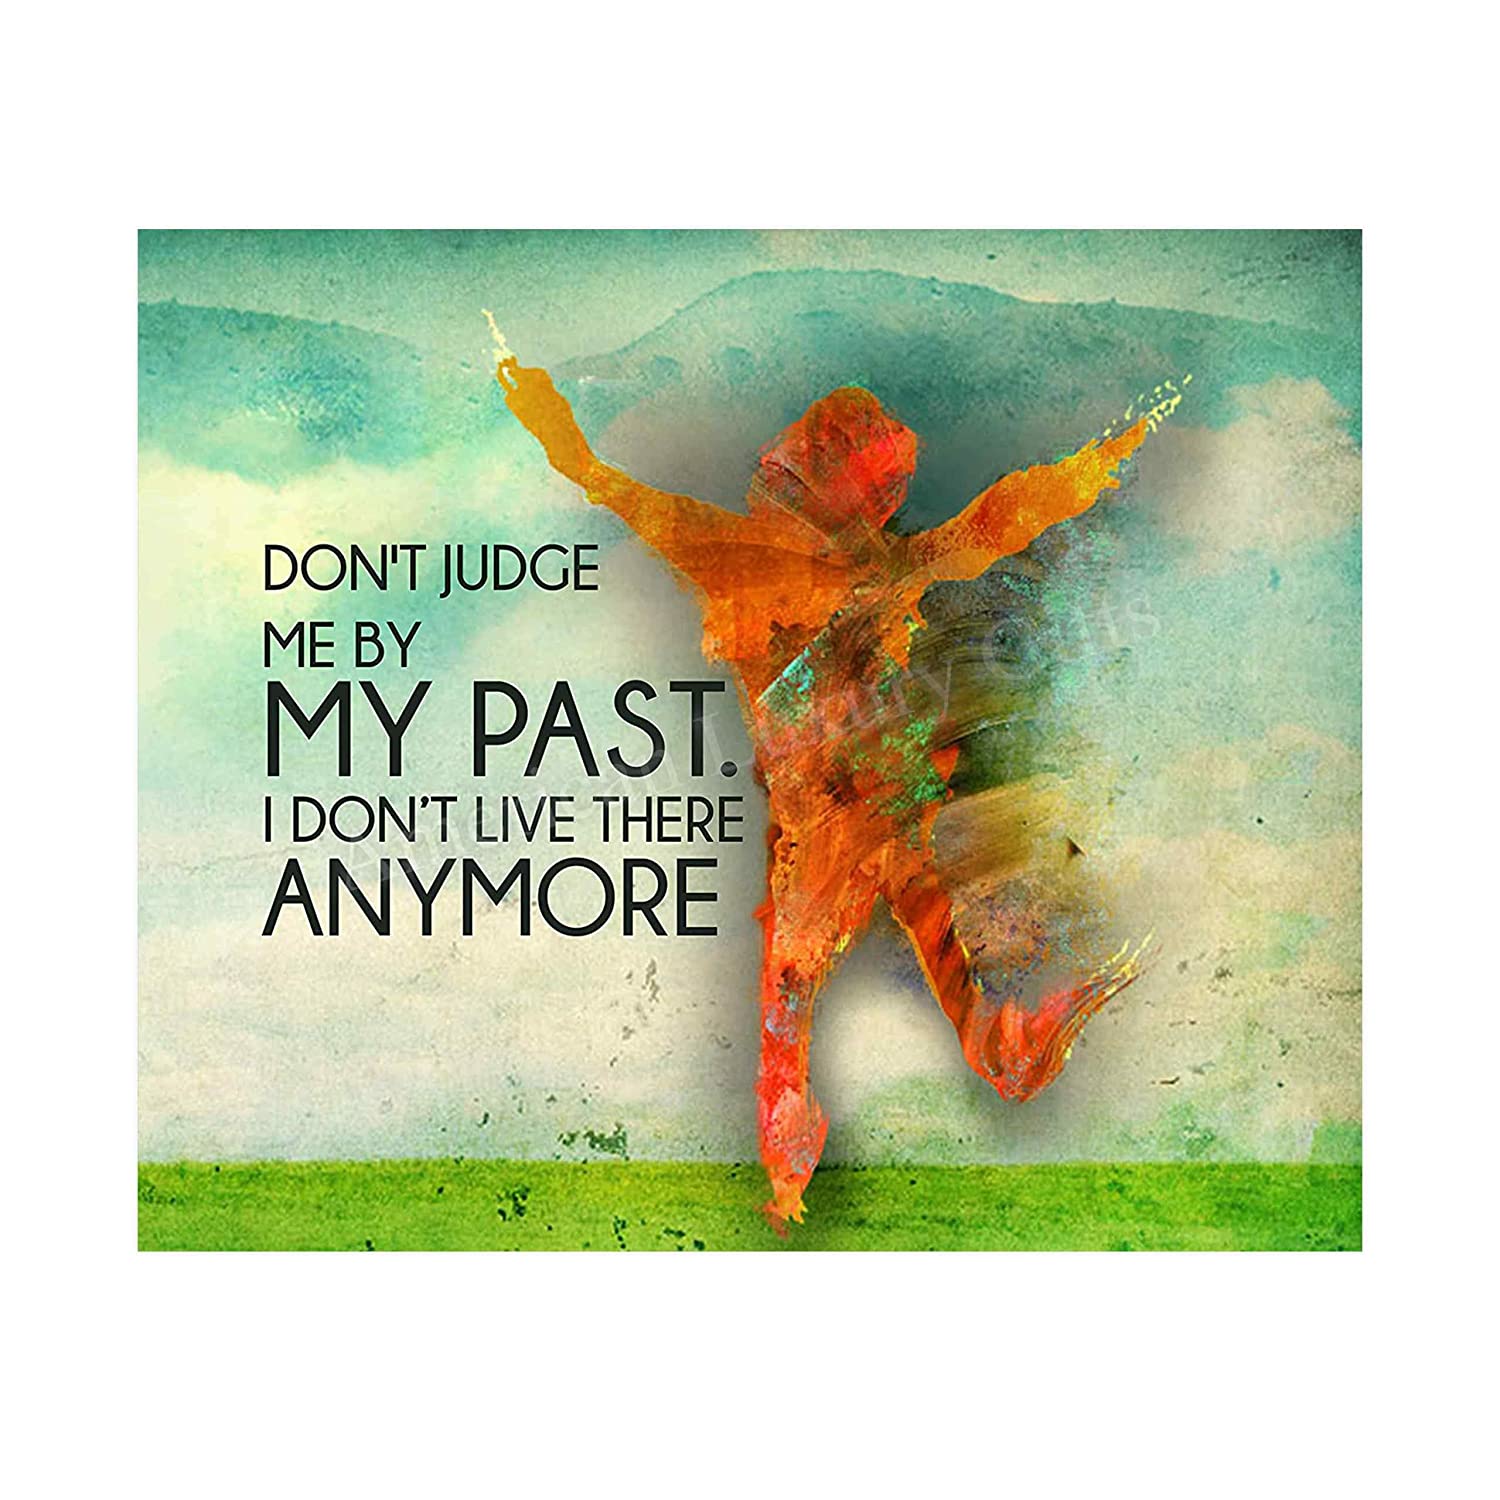 Don't Judge Me By My Past I Don't Live There Anymore Inspirational Quotes Wall Sign 8 X 10 Abstract Art Print Ready To Frame. Positive Home Office School Dorm Decor. Great Reminder For All!